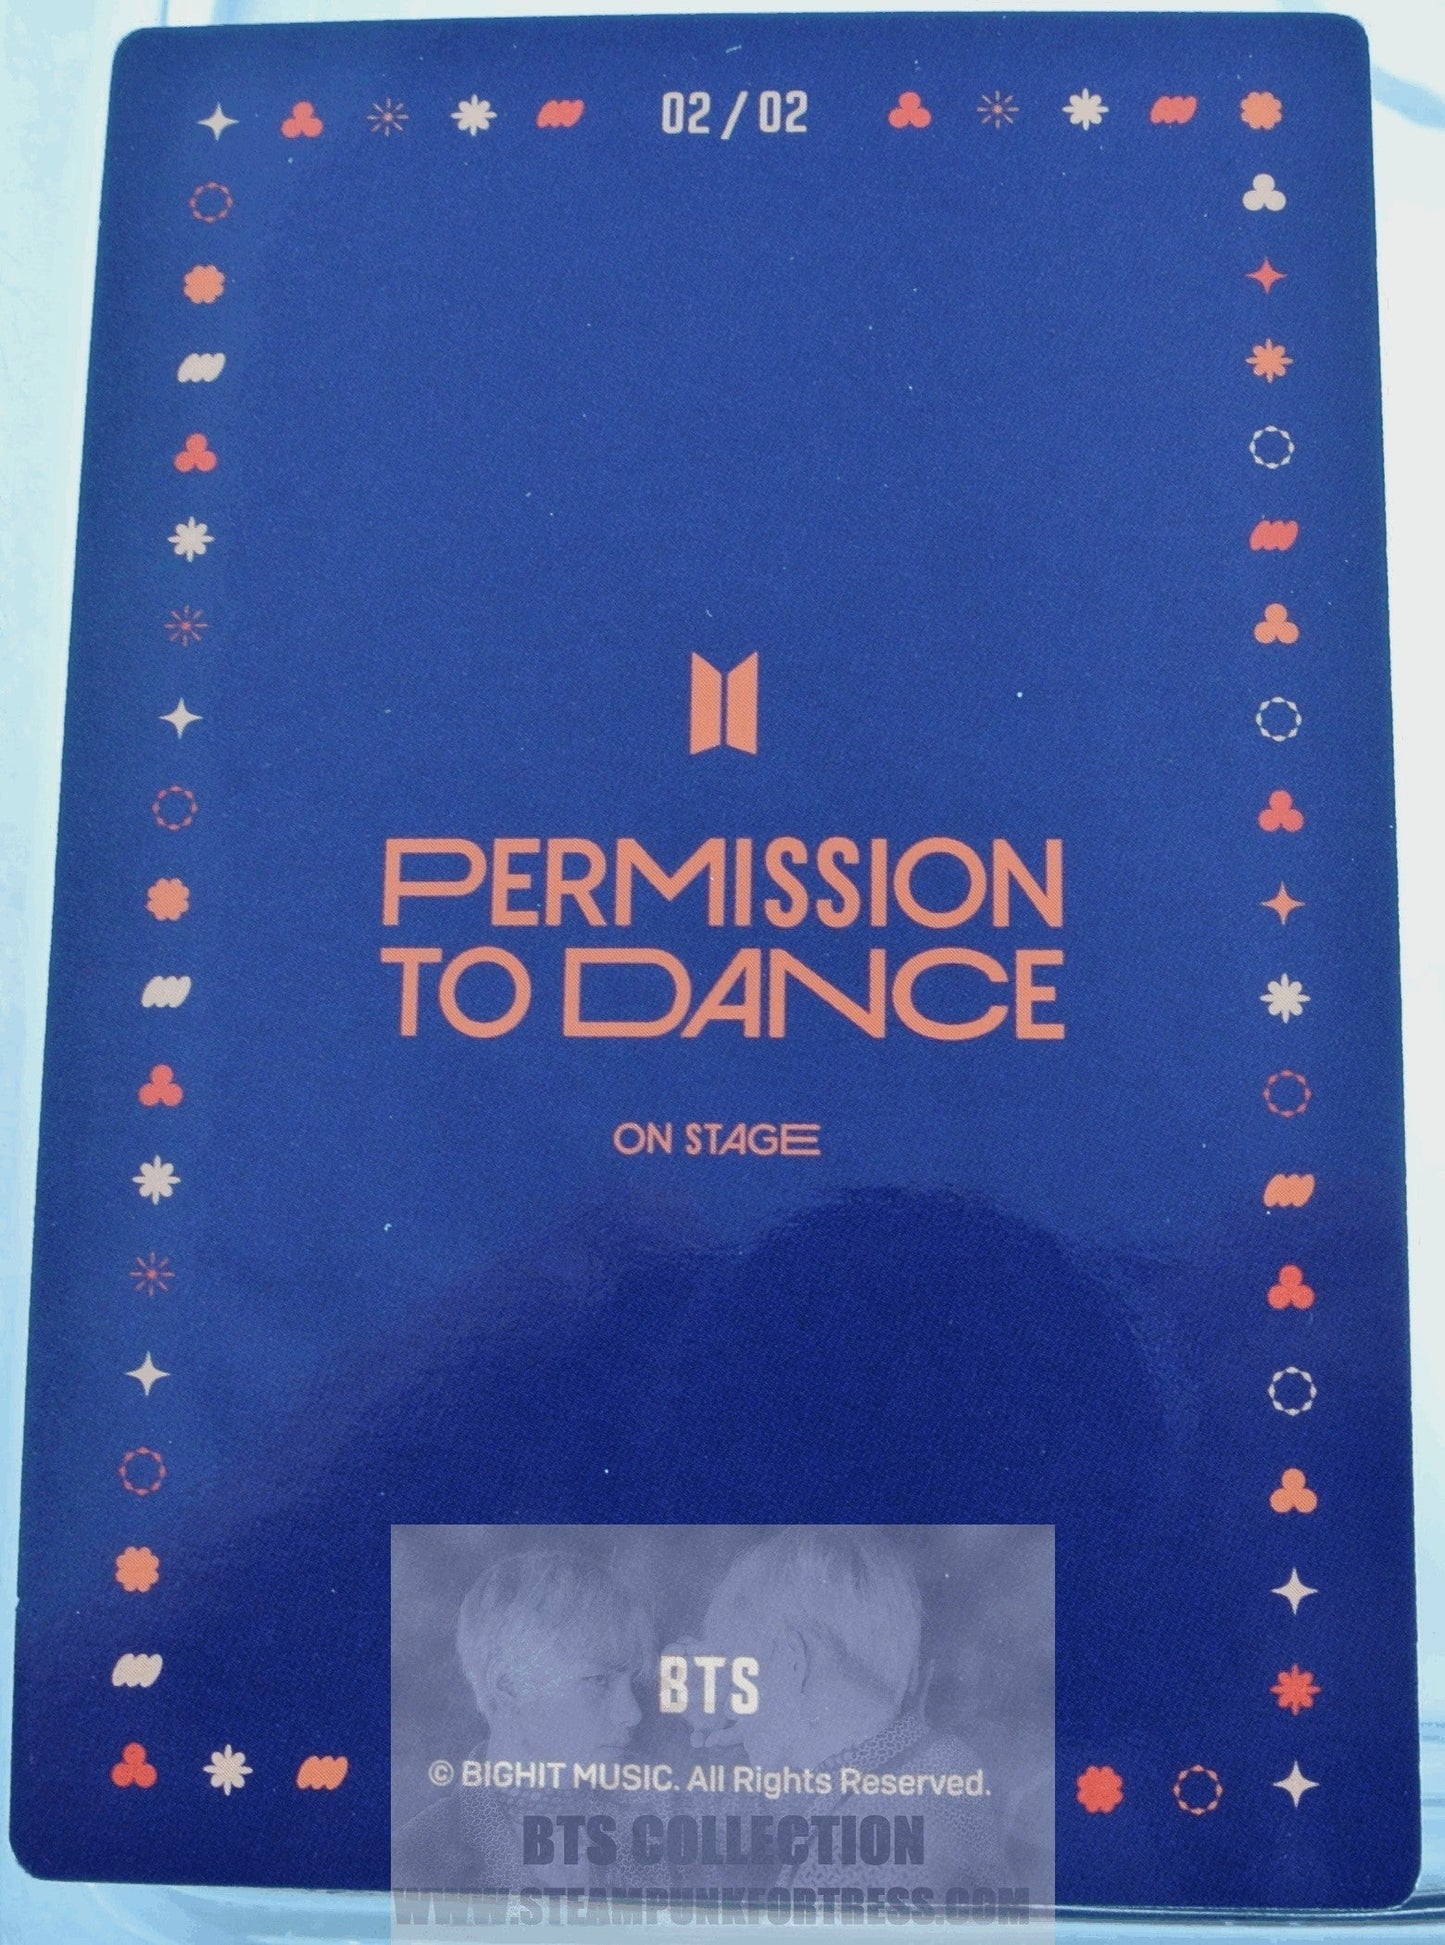 BTS PERMISSION TO DANCE PTD ON STAGE SEOUL JIN SUGA J-HOPE RM JIMIN V JUNGKOOK GROUP #2 OF 2 LIMITED EDITION PHOTOCARD PHOTO CARD PC NEW OFFICIAL MERCHANDISE